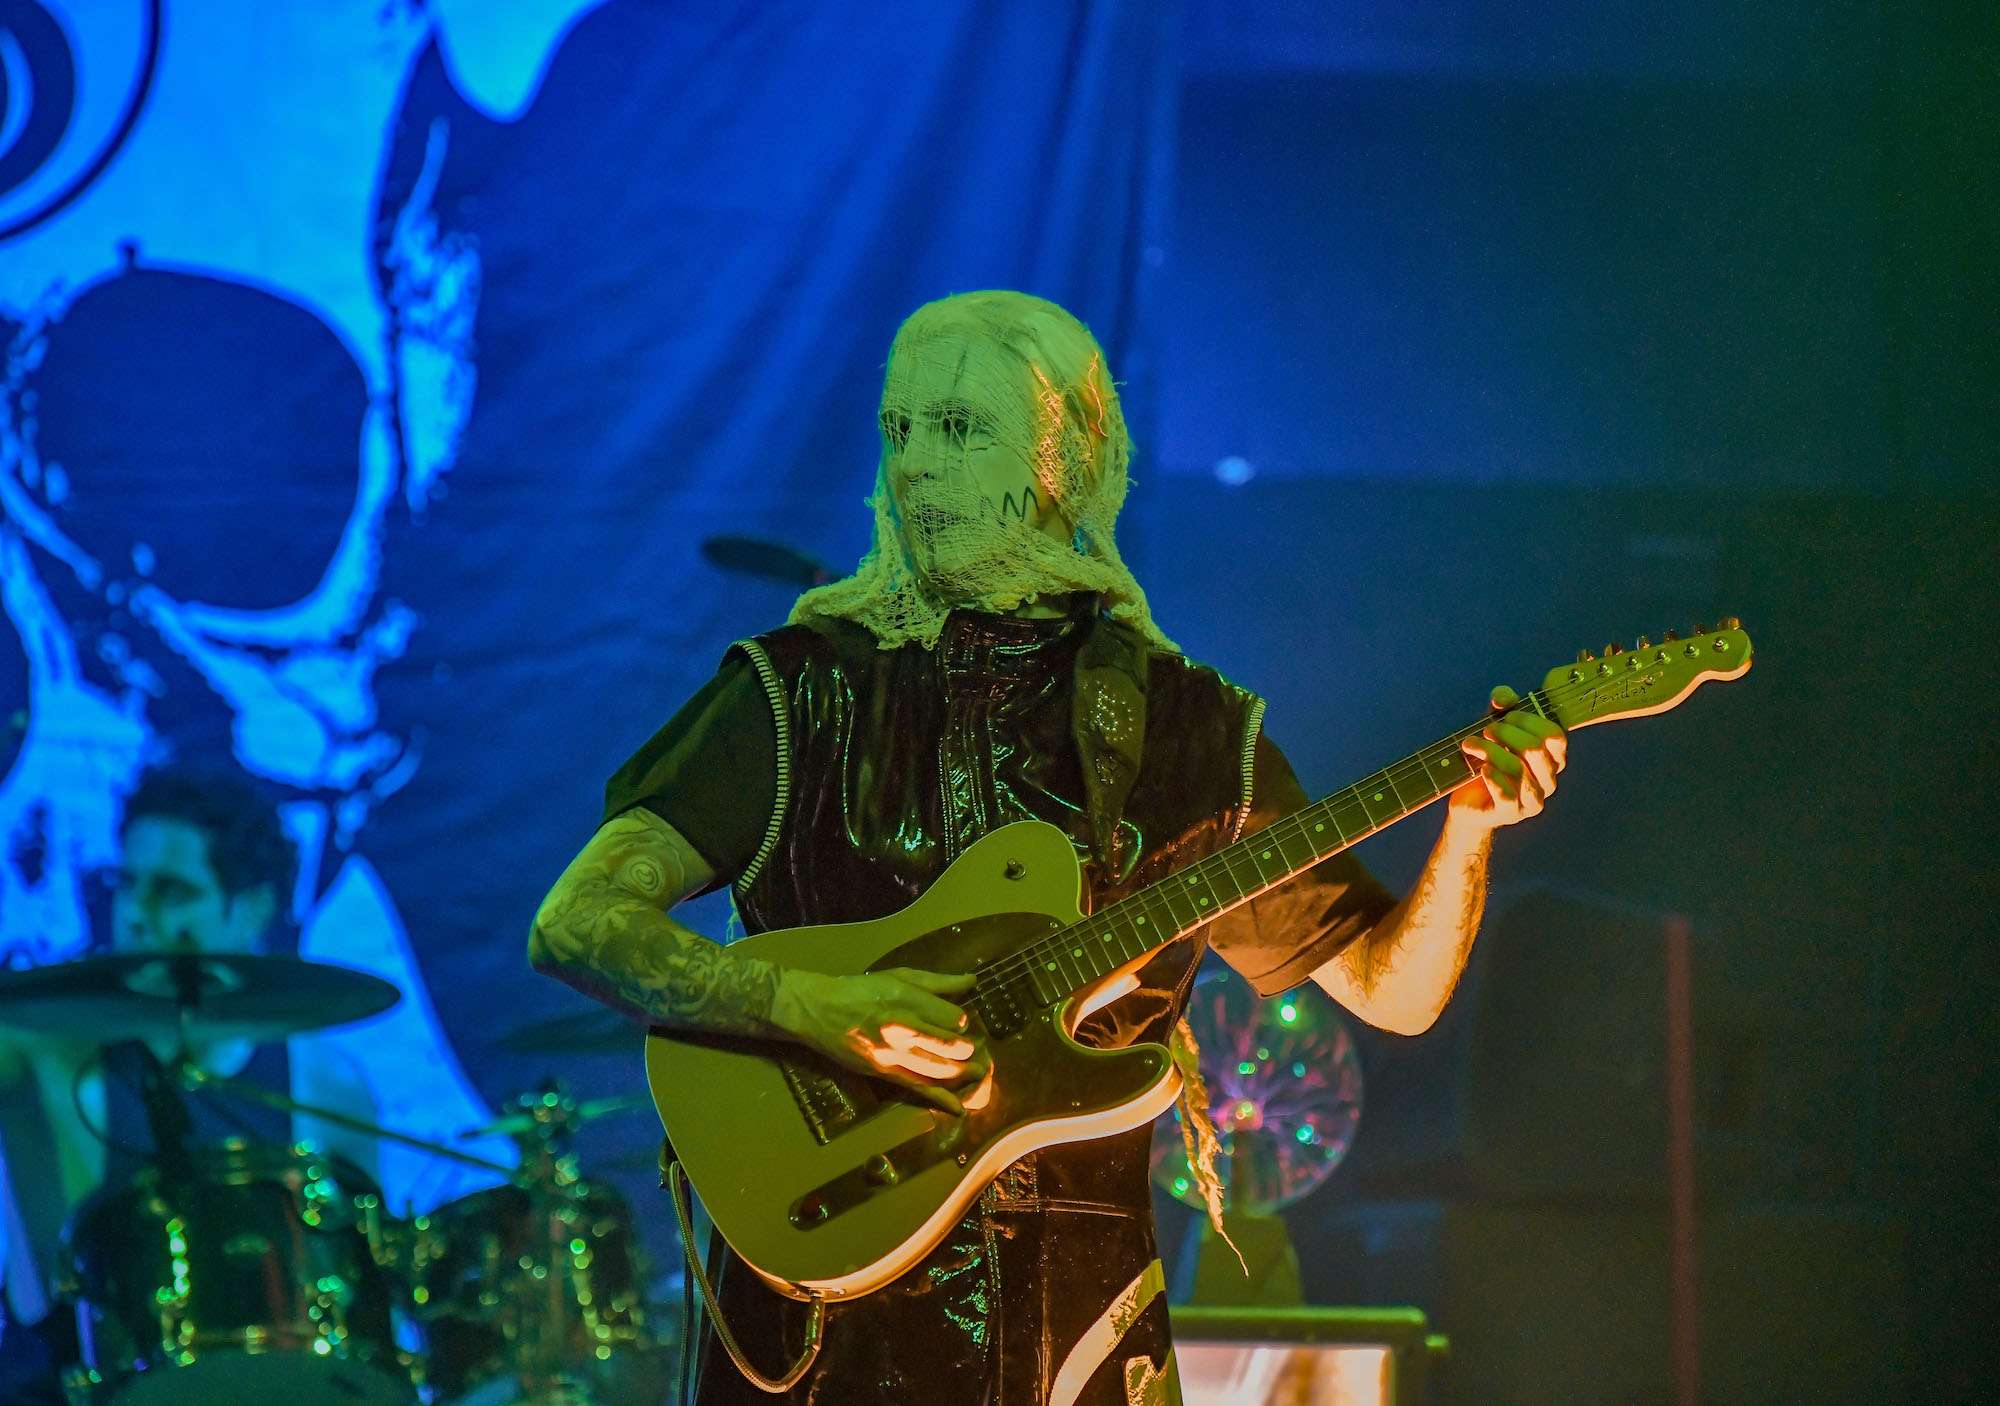 John 5 Live at The Forge [GALLERY] 13